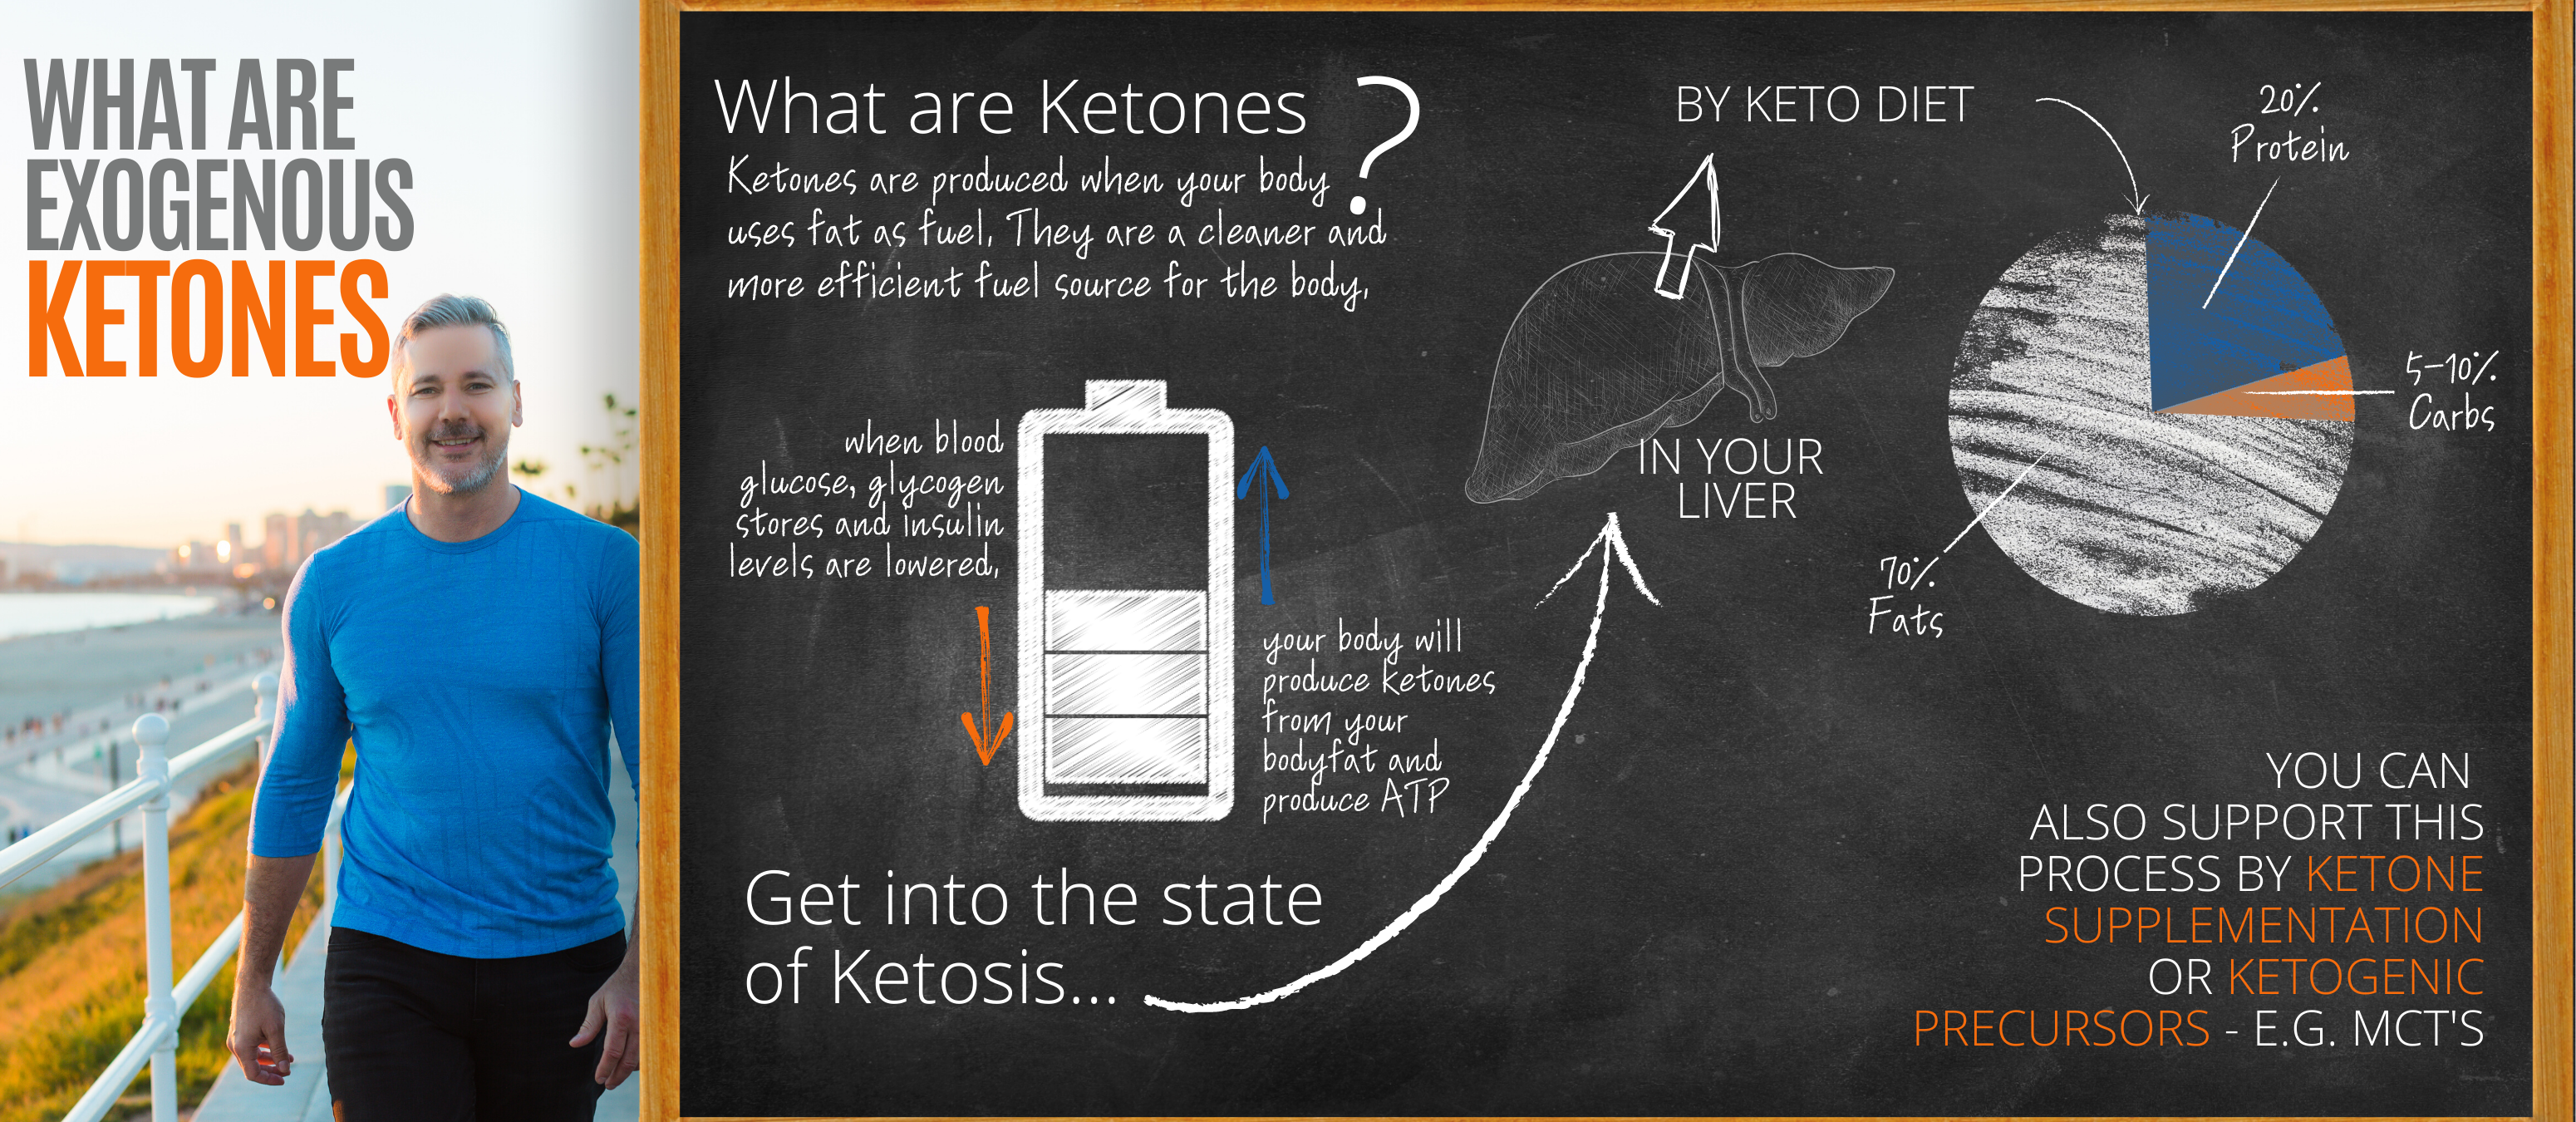 What are exogenous ketones